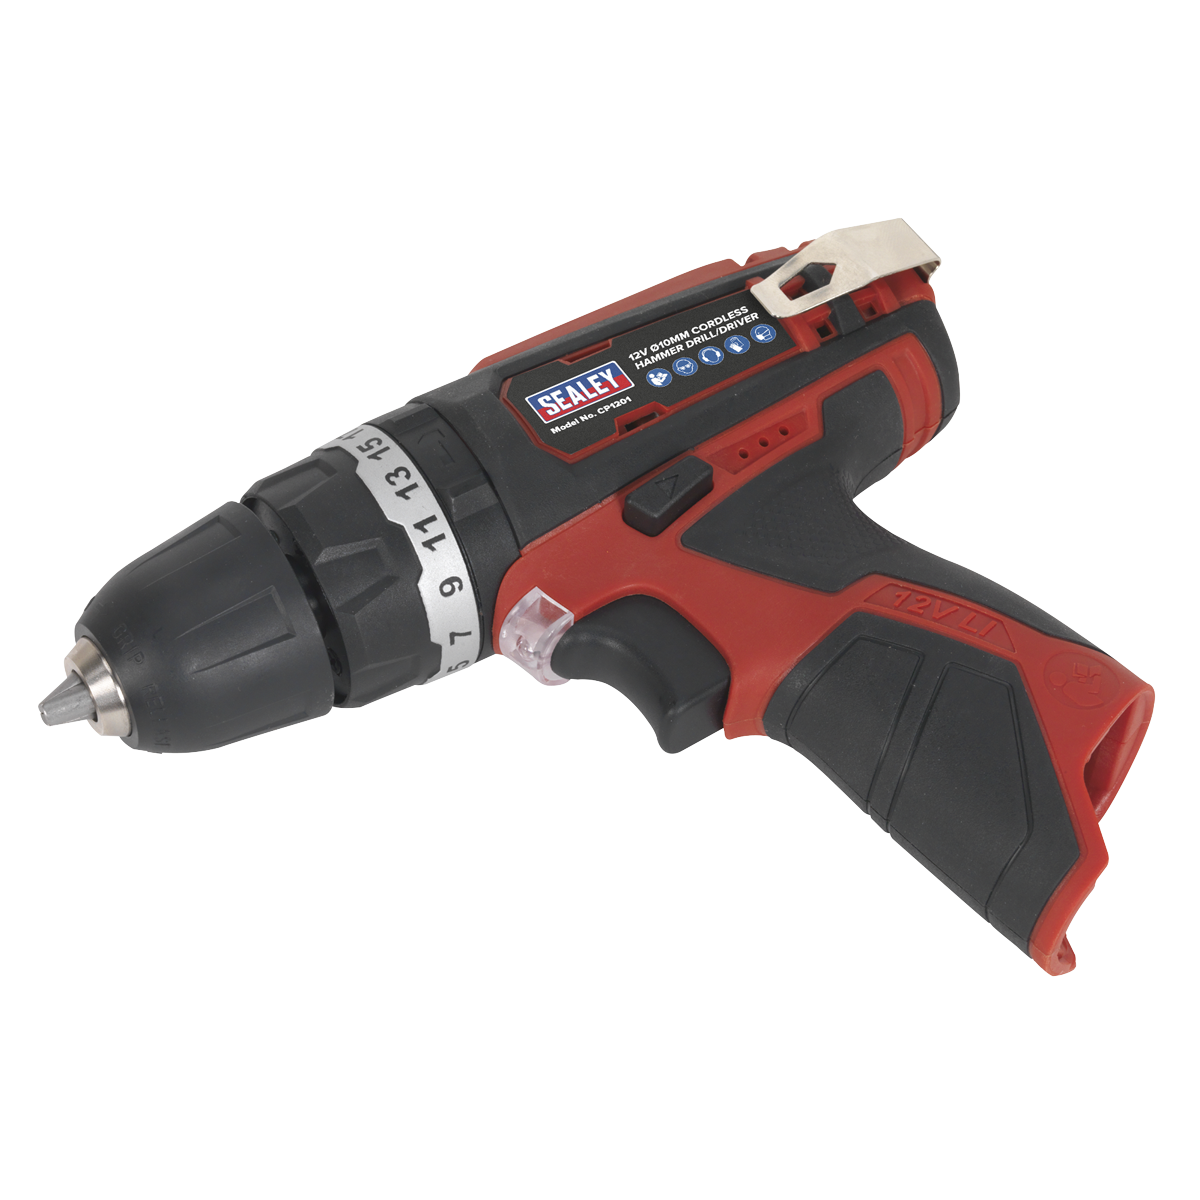 Sealey 12V SV12 Series Ø10mm Cordless Hammer Drill/Driver - Body Only CP1201